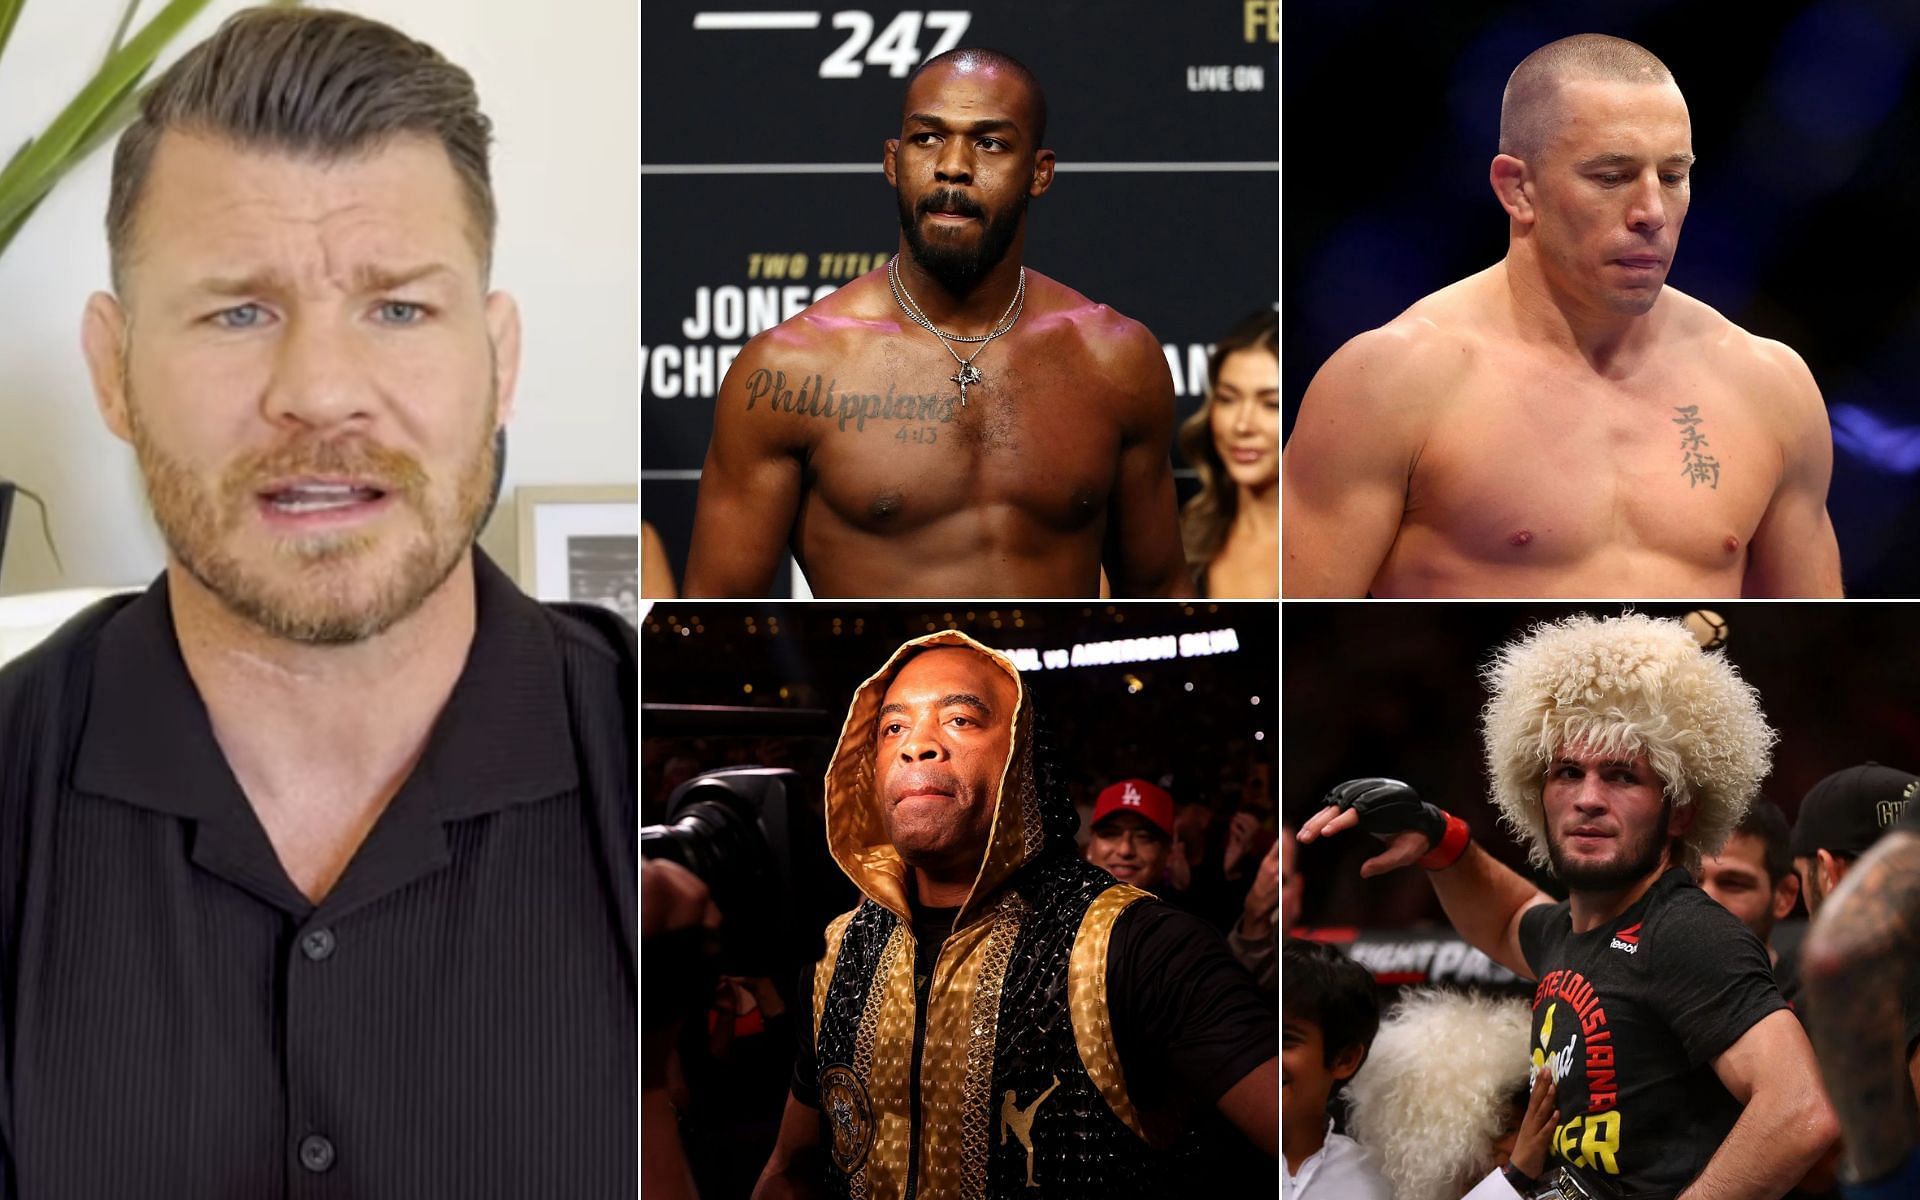 Michael Bisping (Left), and Jon Jones, Georges St-Pierre, Anderson Silva, and Khabib Nurmagomedov  (Right) [Photo credit Michael Bisping - YouTube]